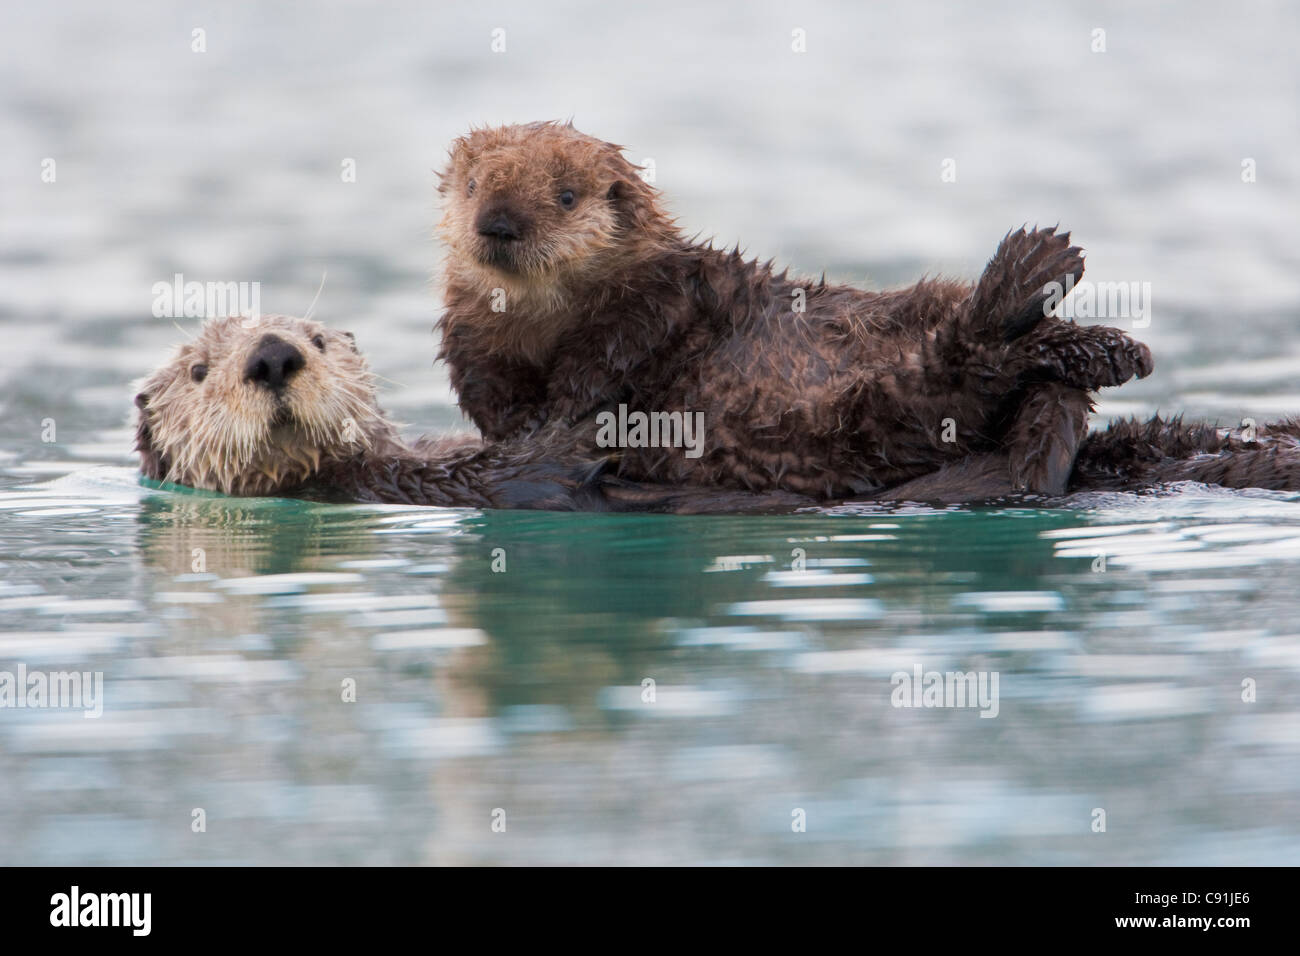 Sea otter floating on back holding newborn pup, Prince William Sound, Southcentral Alaska, Winter Stock Photo